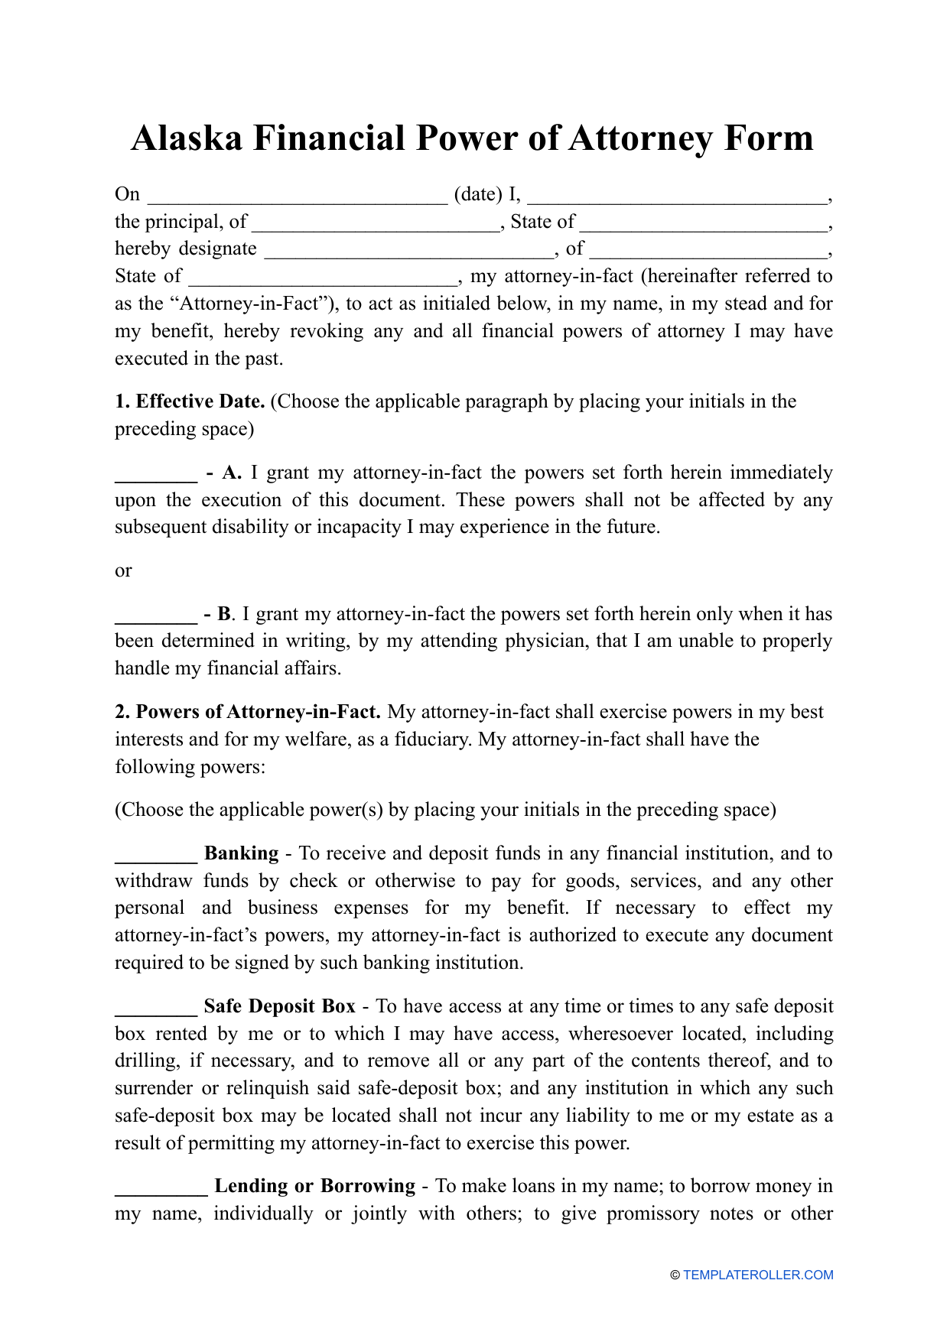 Financial Power of Attorney Form - Alaska, Page 1